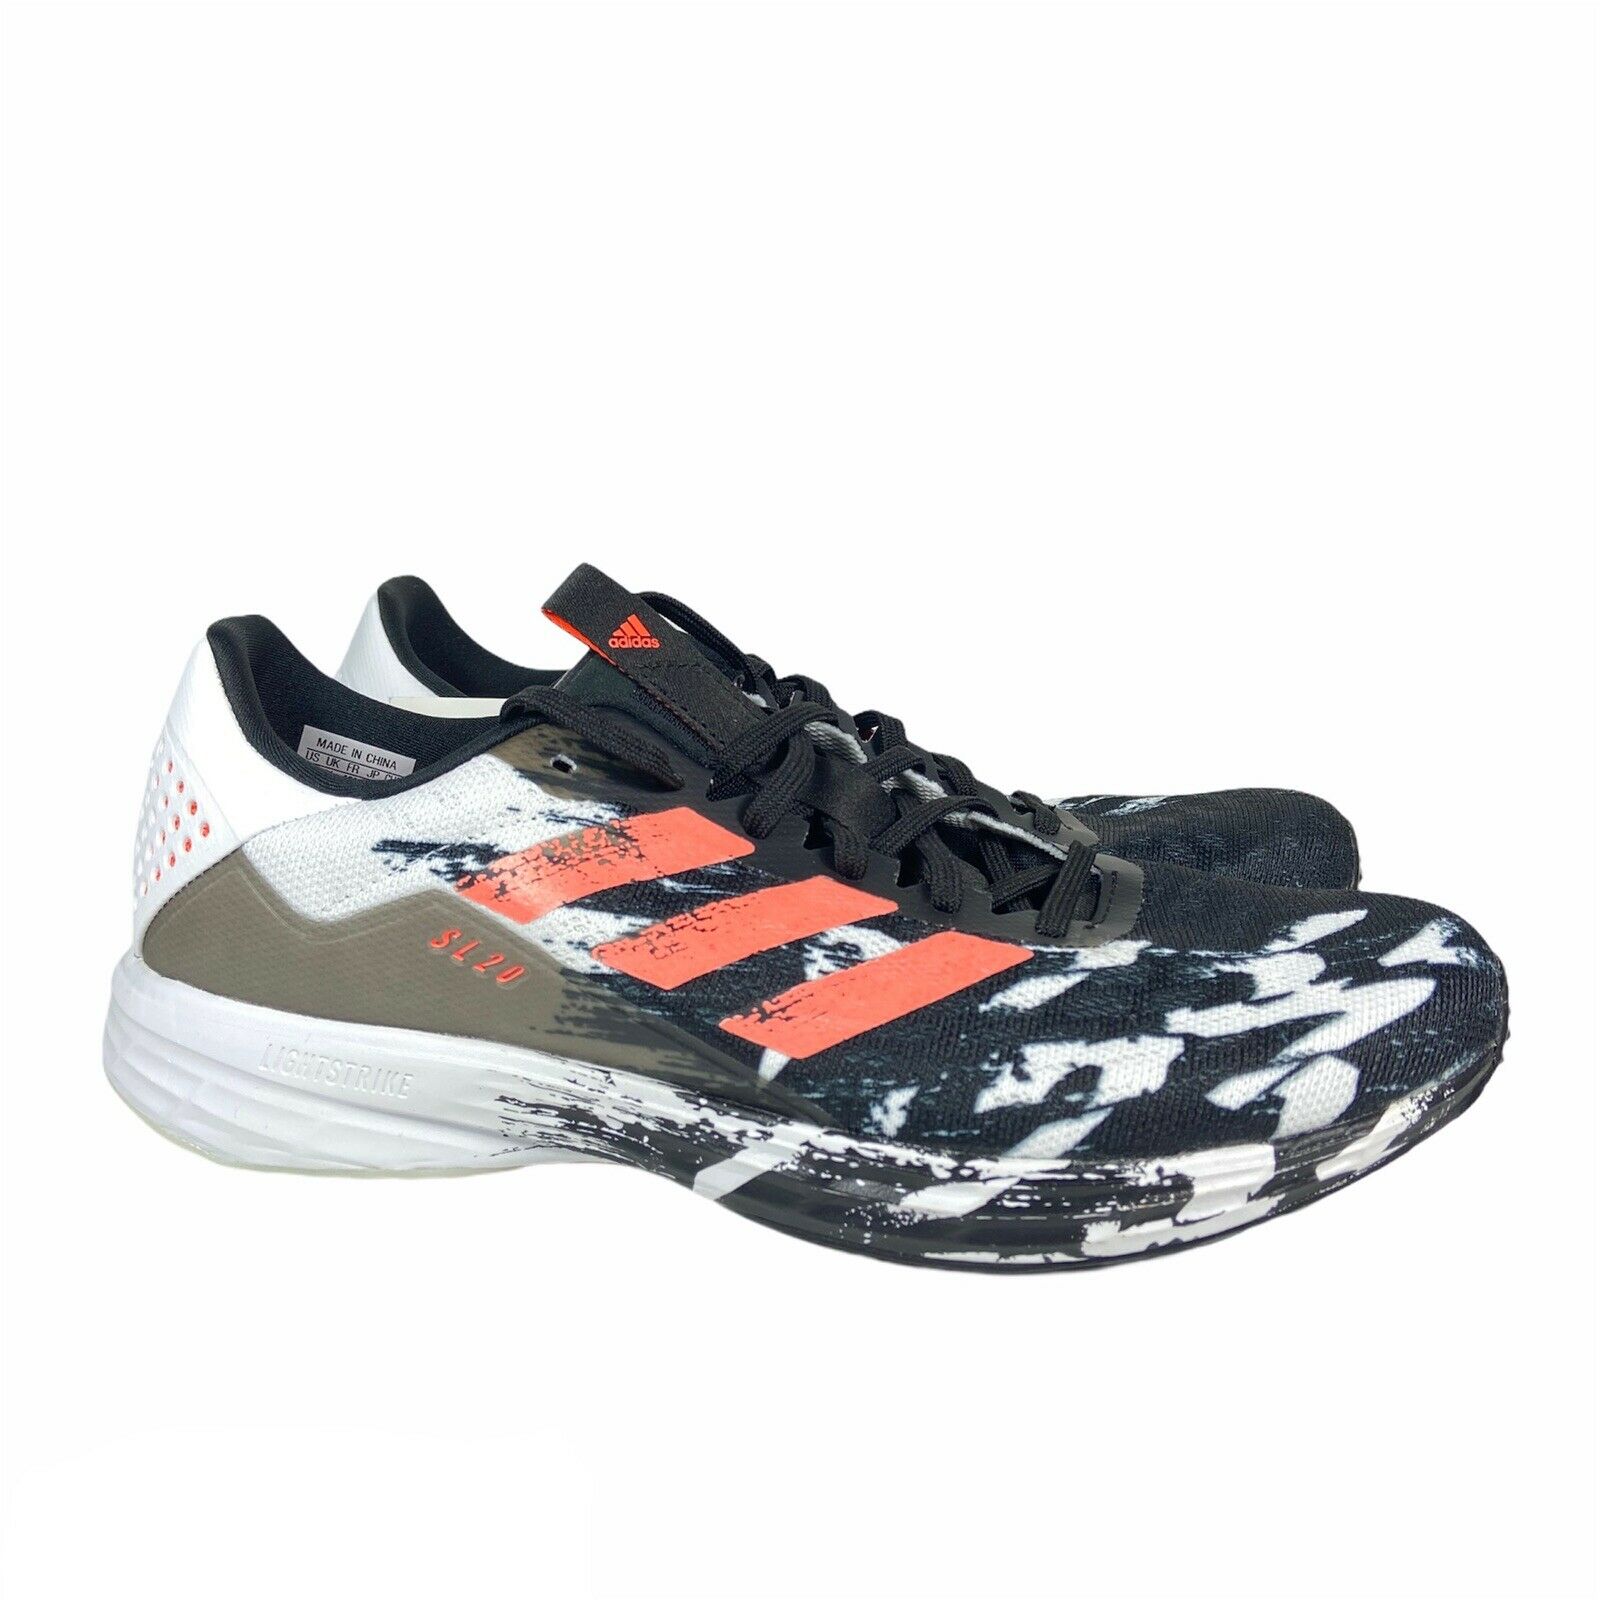 Adidas SL20 Japanese Calligraphy Running Shoes Black Coral White EF0804 Mens 11